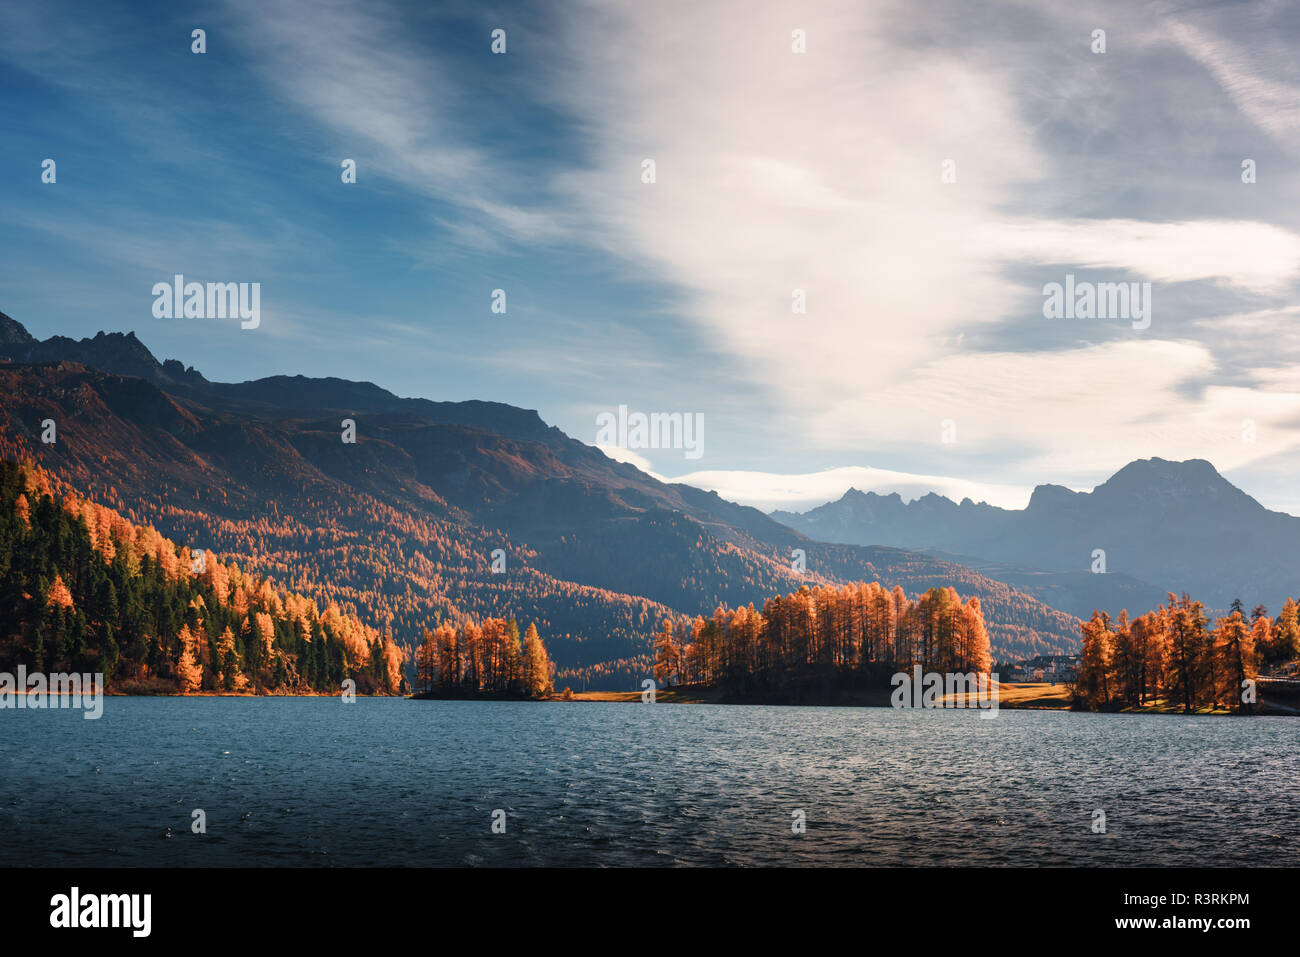 Picturesque view on autumn lake Silvaplana in Swiss Alps. Colorful forest with orange larch and snowy mountains on background. Switzerland Stock Photo